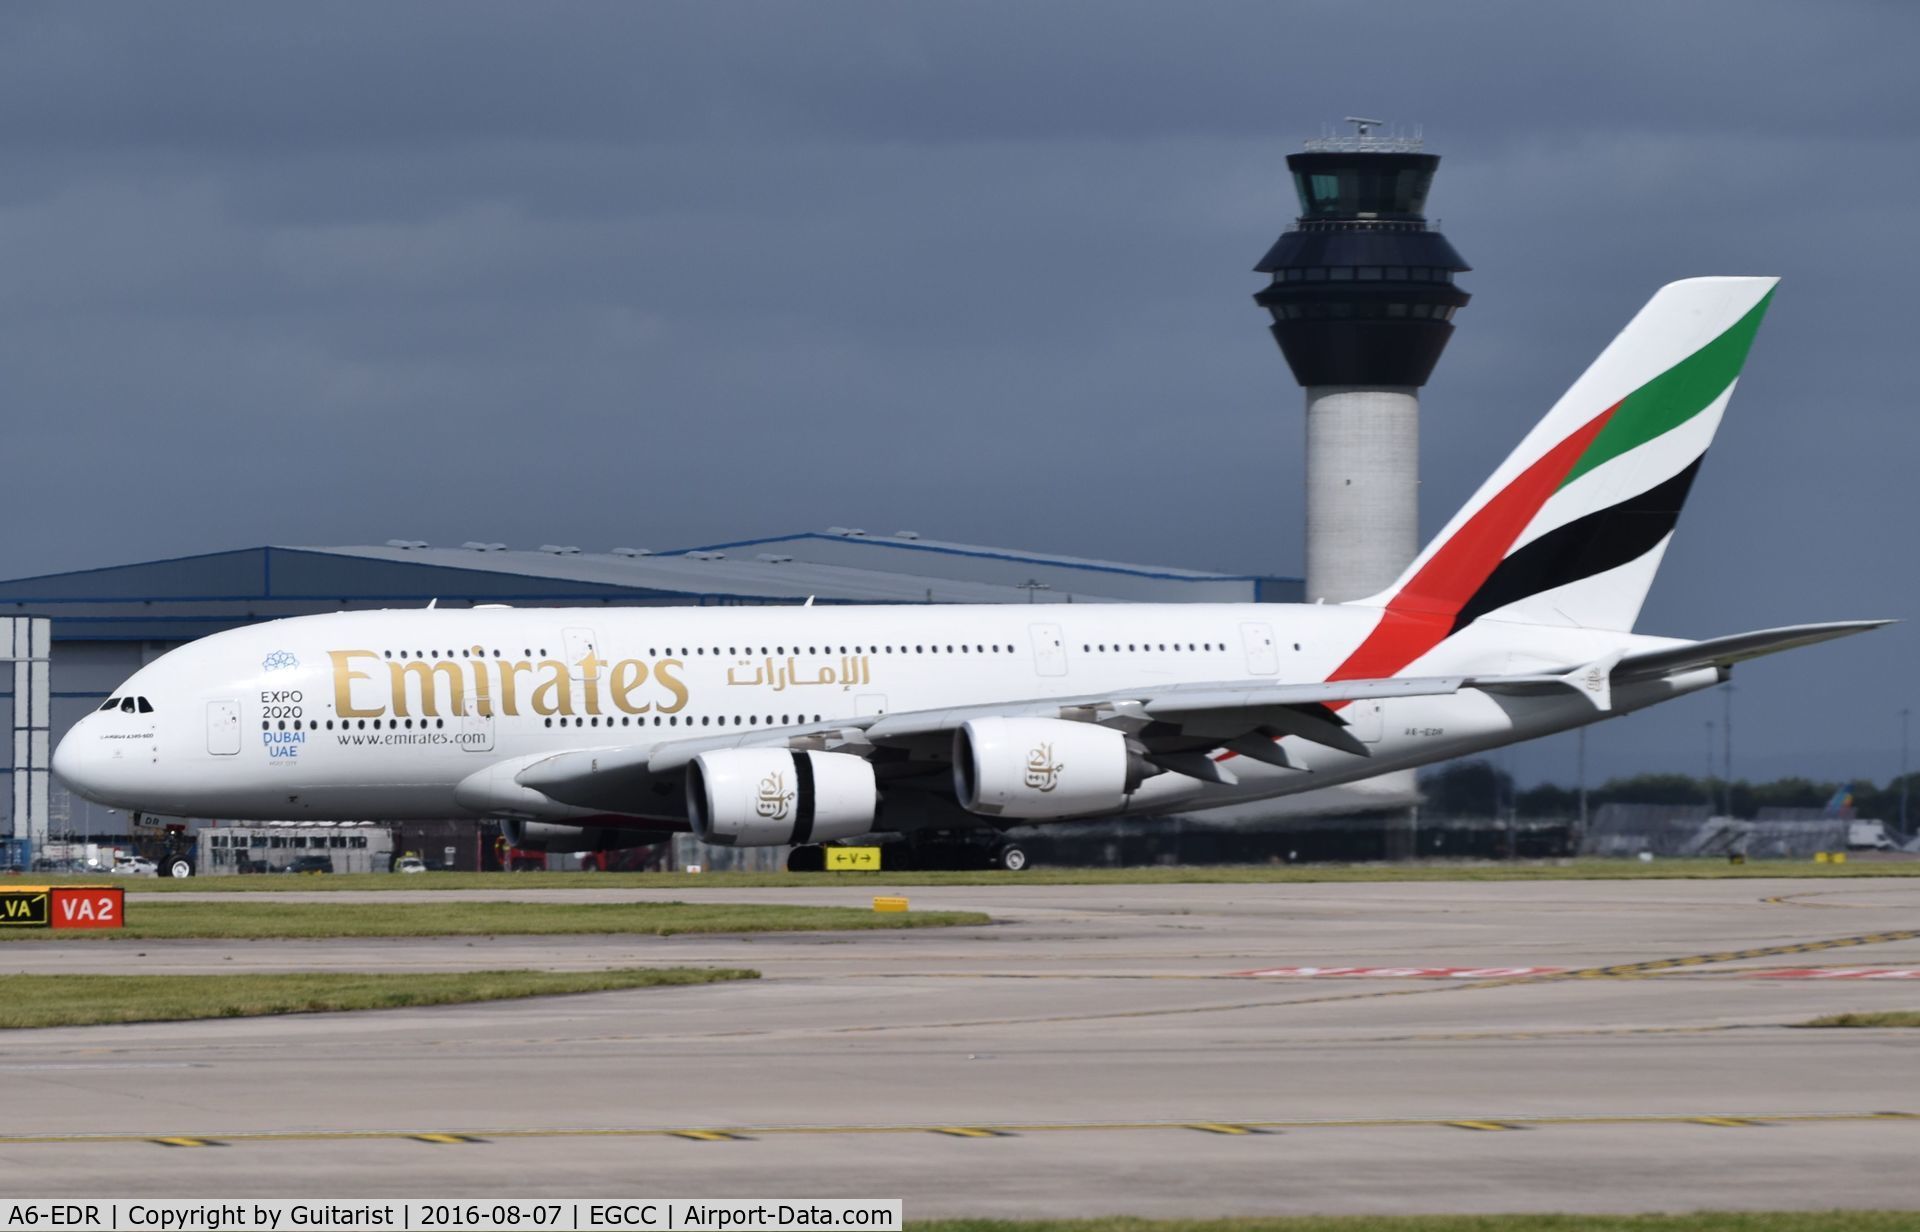 A6-EDR, 2011 Airbus A380-861 C/N 083, At Manchester